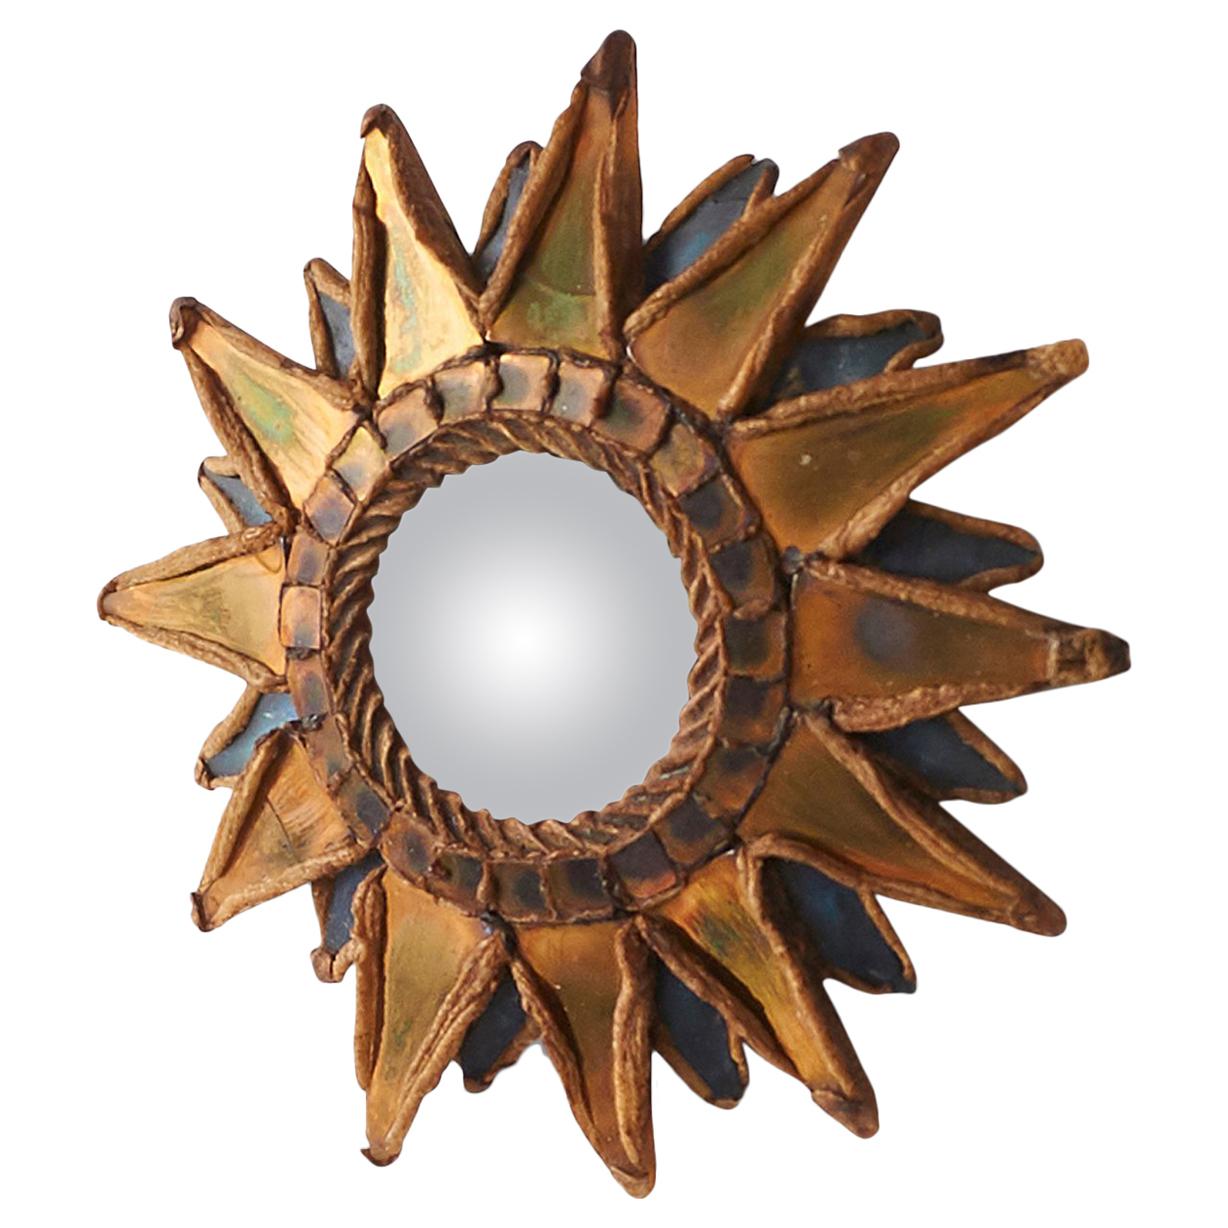 Small “Pointed Sun” mirror by Line Vautrin
A unique mirror completely handmade by Line Vautrin using Talosel resin with mirror inlays and a convex mirror. Signed by the artist, 
France, circa 1955-1965.